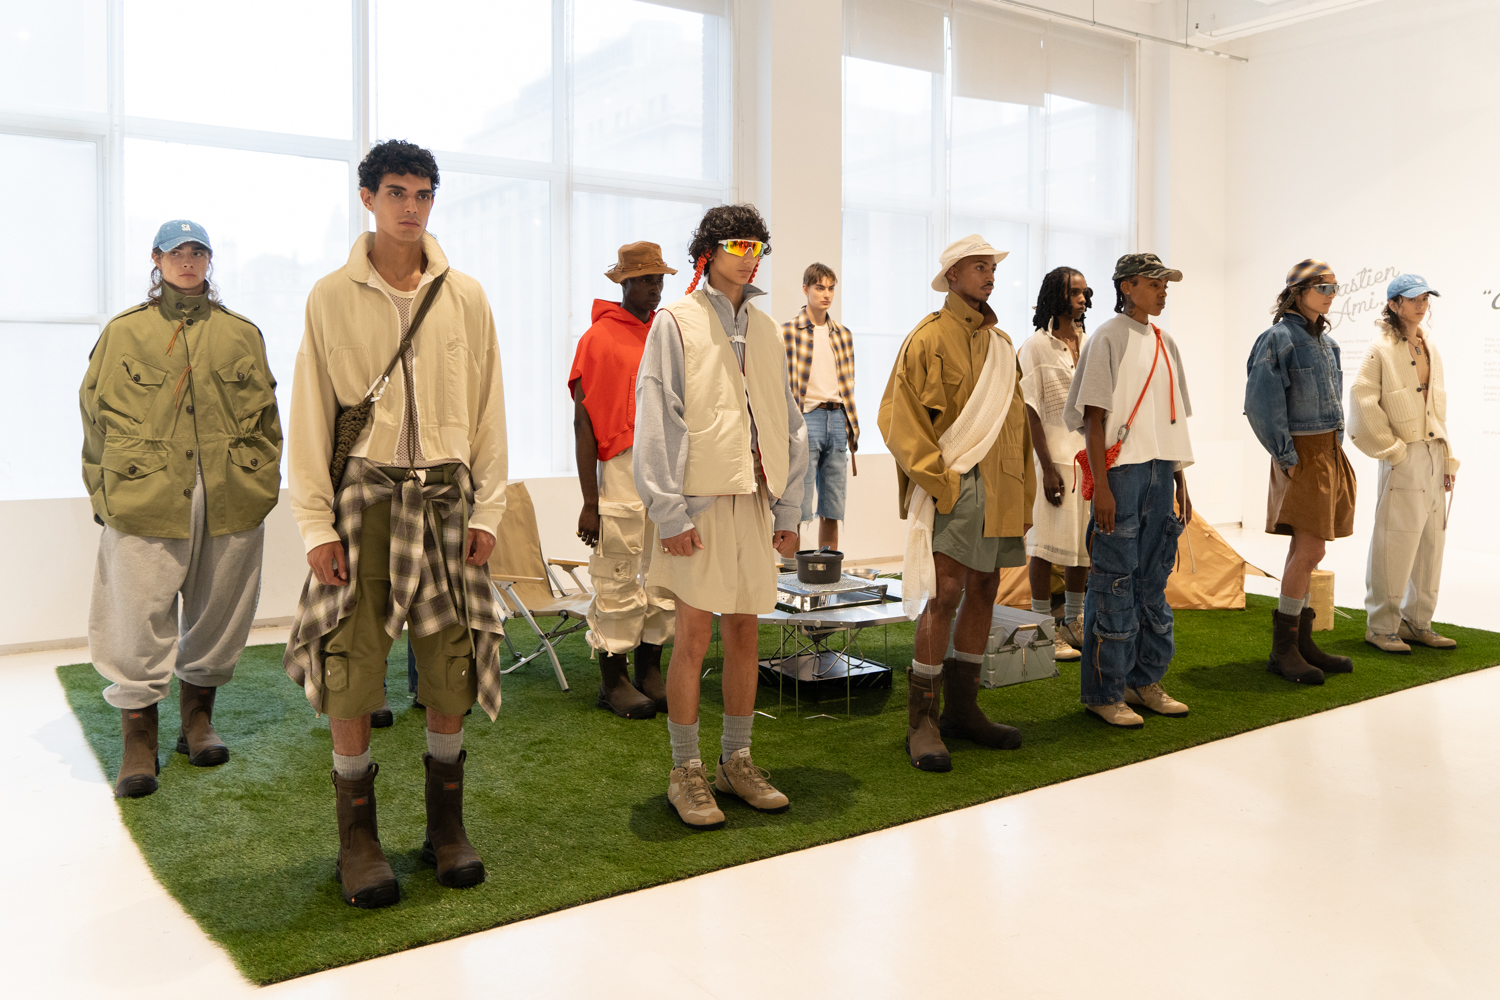 Models stand in two lines in a fashion showroom with white walls and floors. They are standing on a carpet of artificial turf with camping equipment. They are wearing clothing from the brand SEBASTIEN AMI.